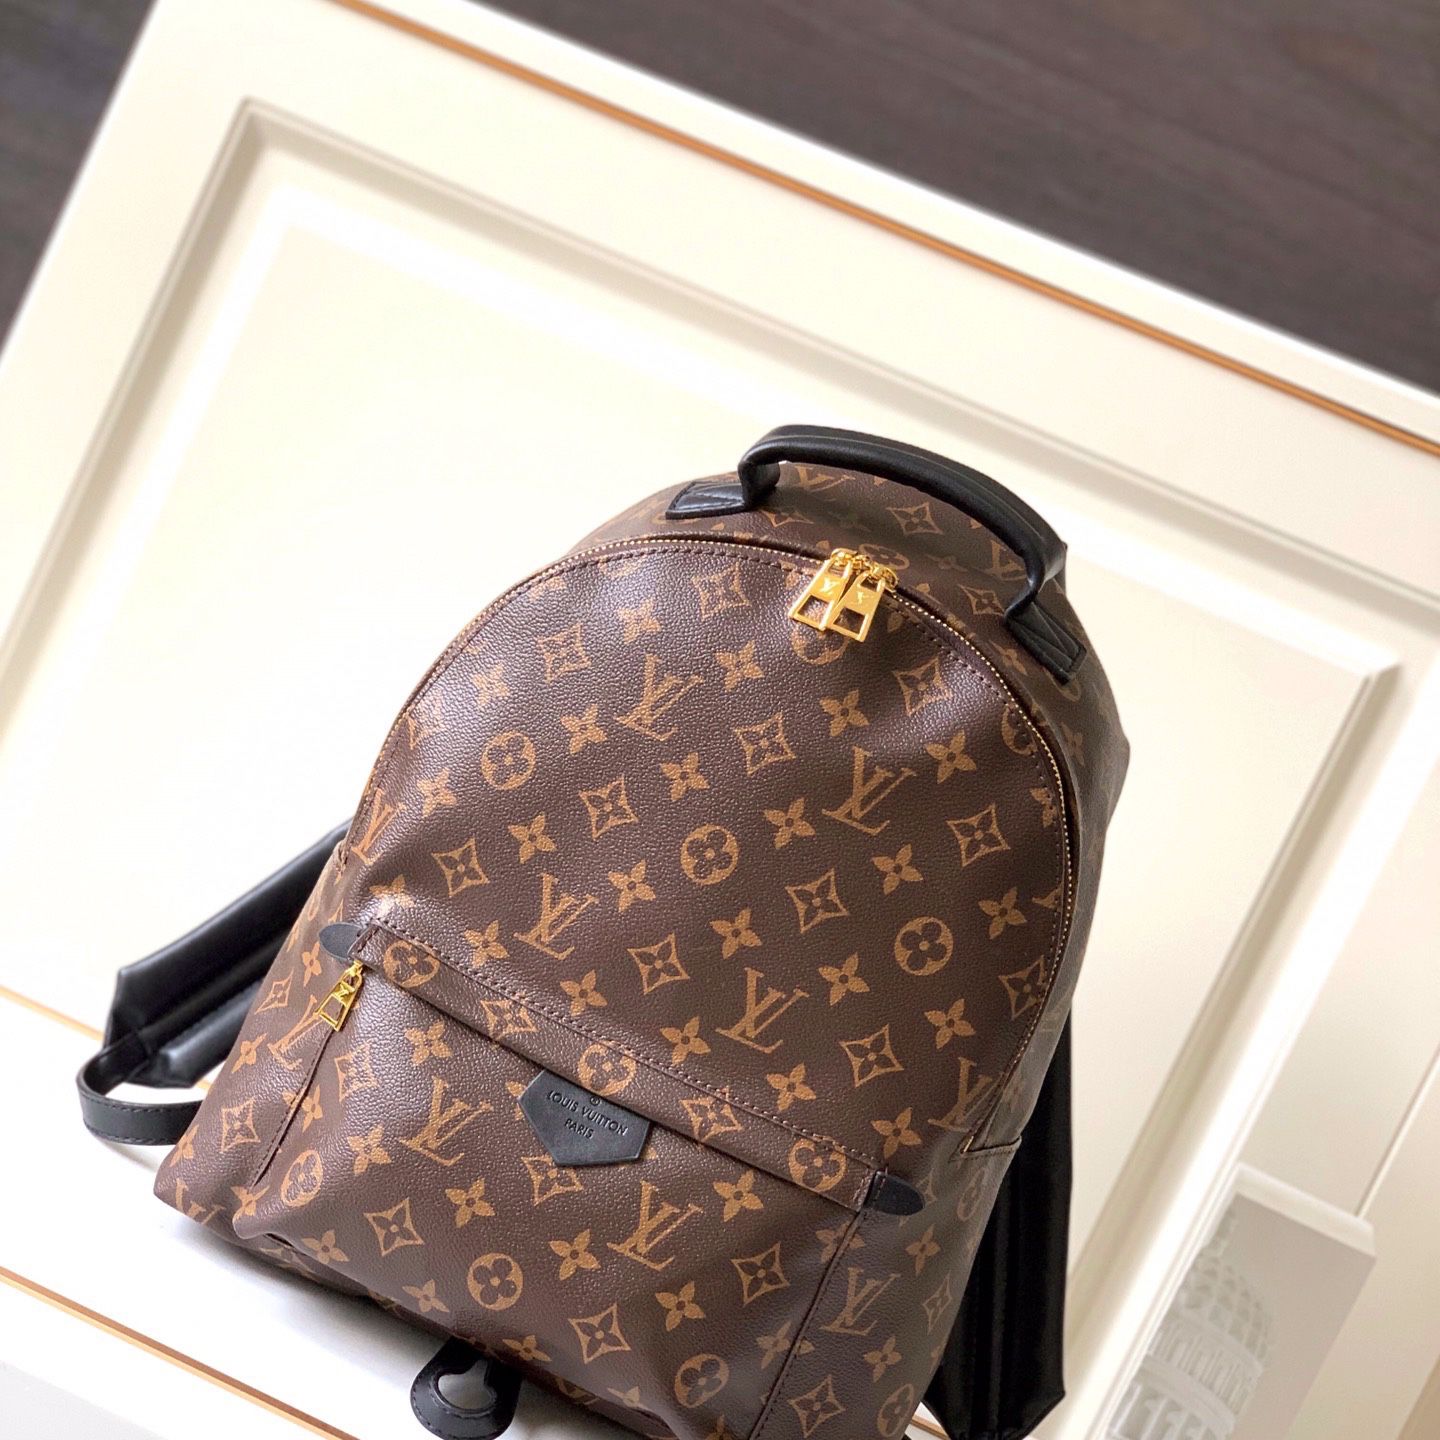 Cheapest Louis Vuitton Purchase✨, Gallery posted by 🤍